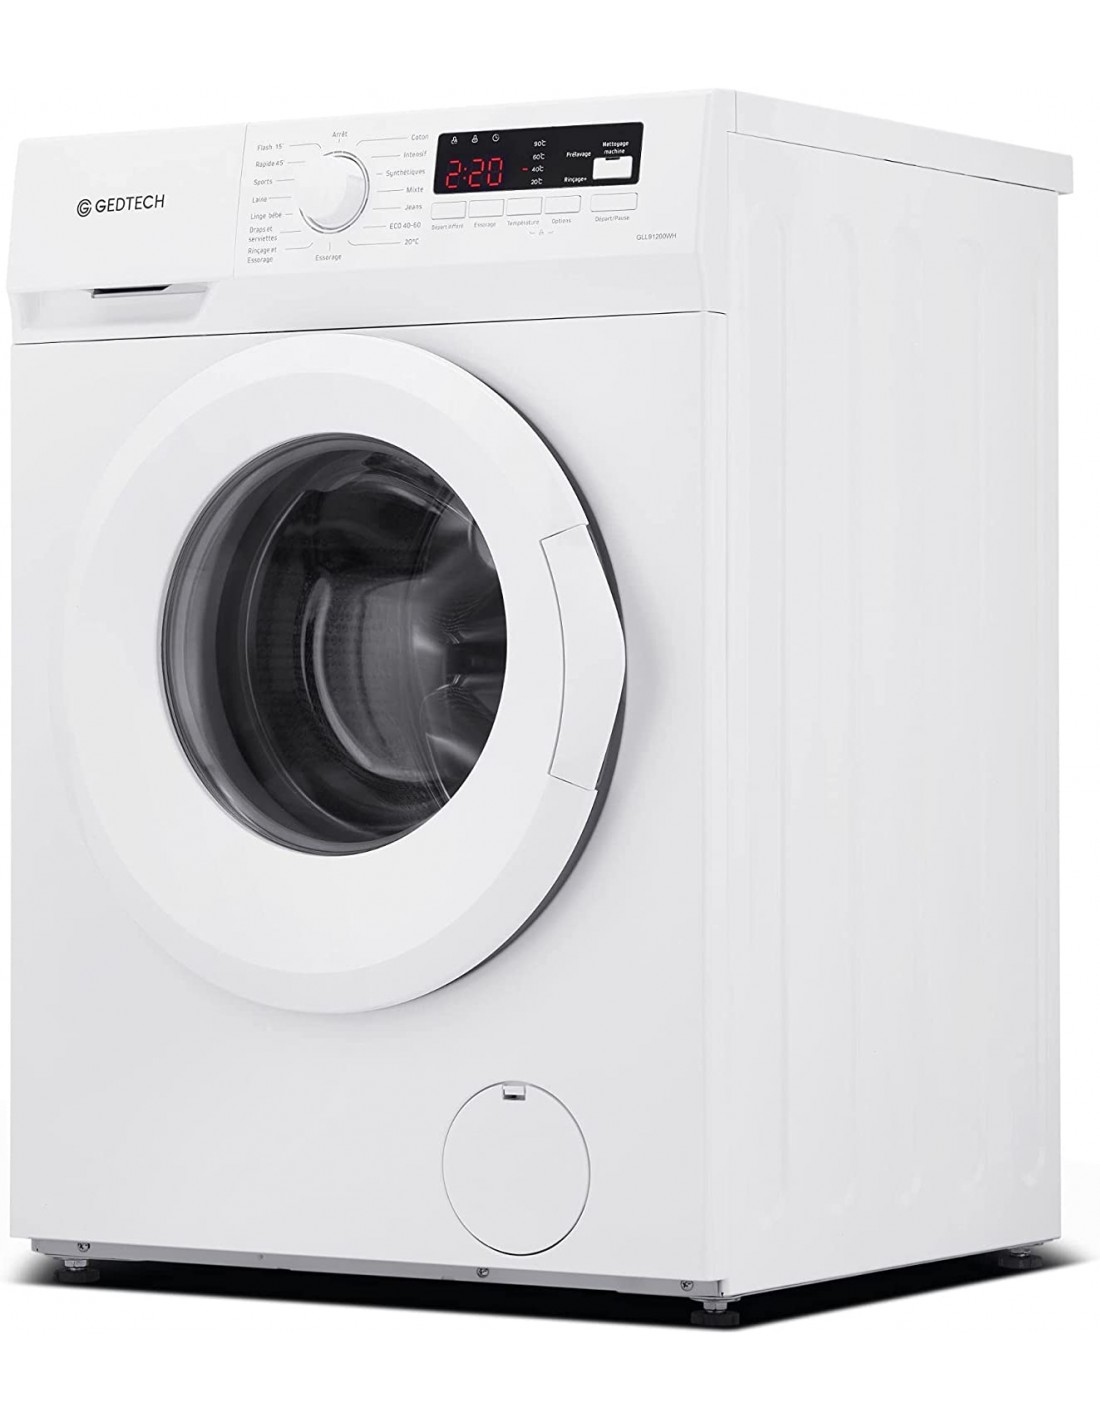 GEDTECH GLL91400WH - Lave-linge frontal 9 Kg - 1400 Trs - E